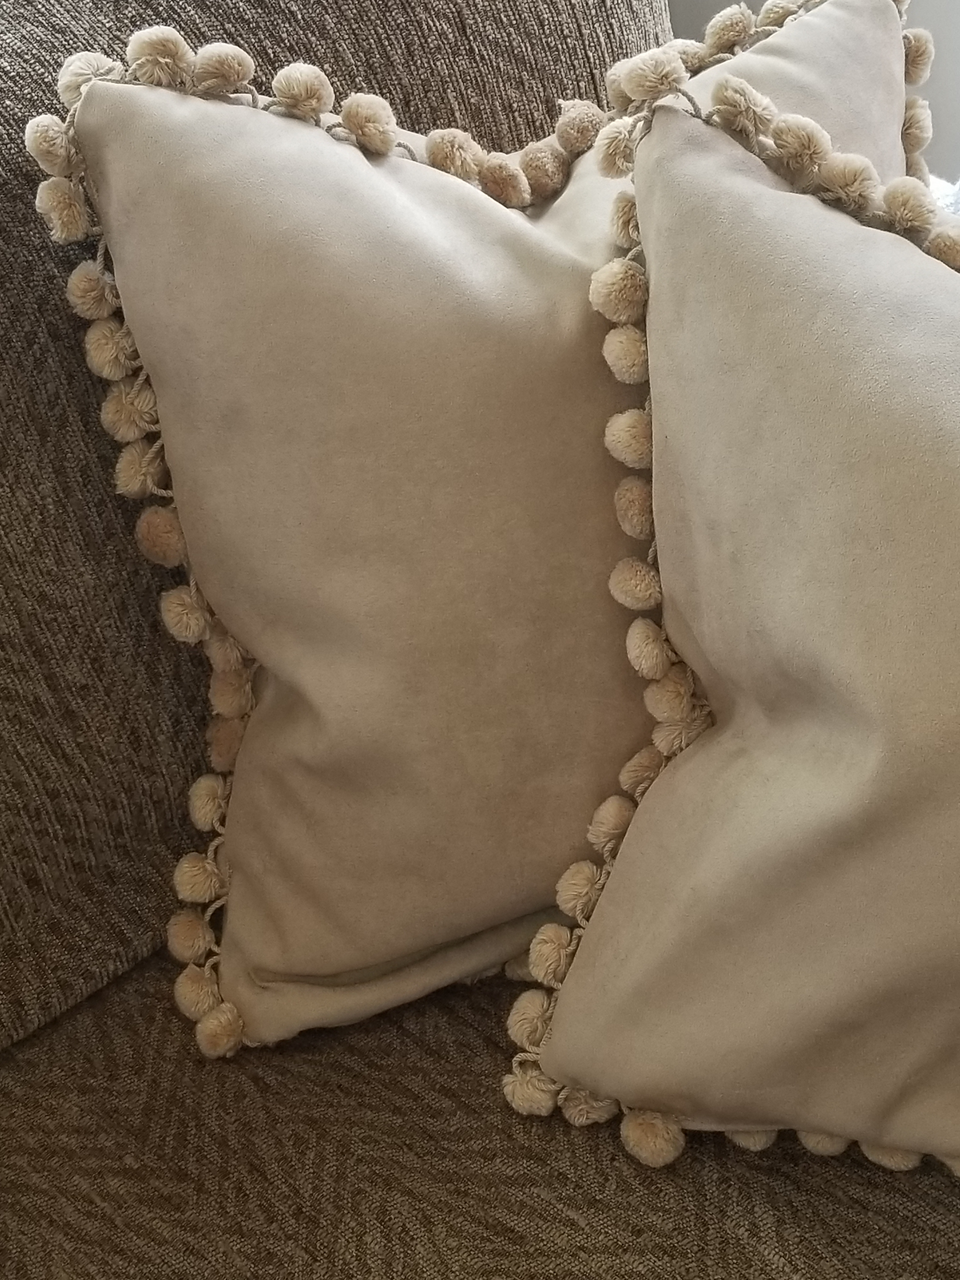 taupe velour fabric pillow covers with matching fur pom pom fringe trim on tan couch with taupe throw cover closeup